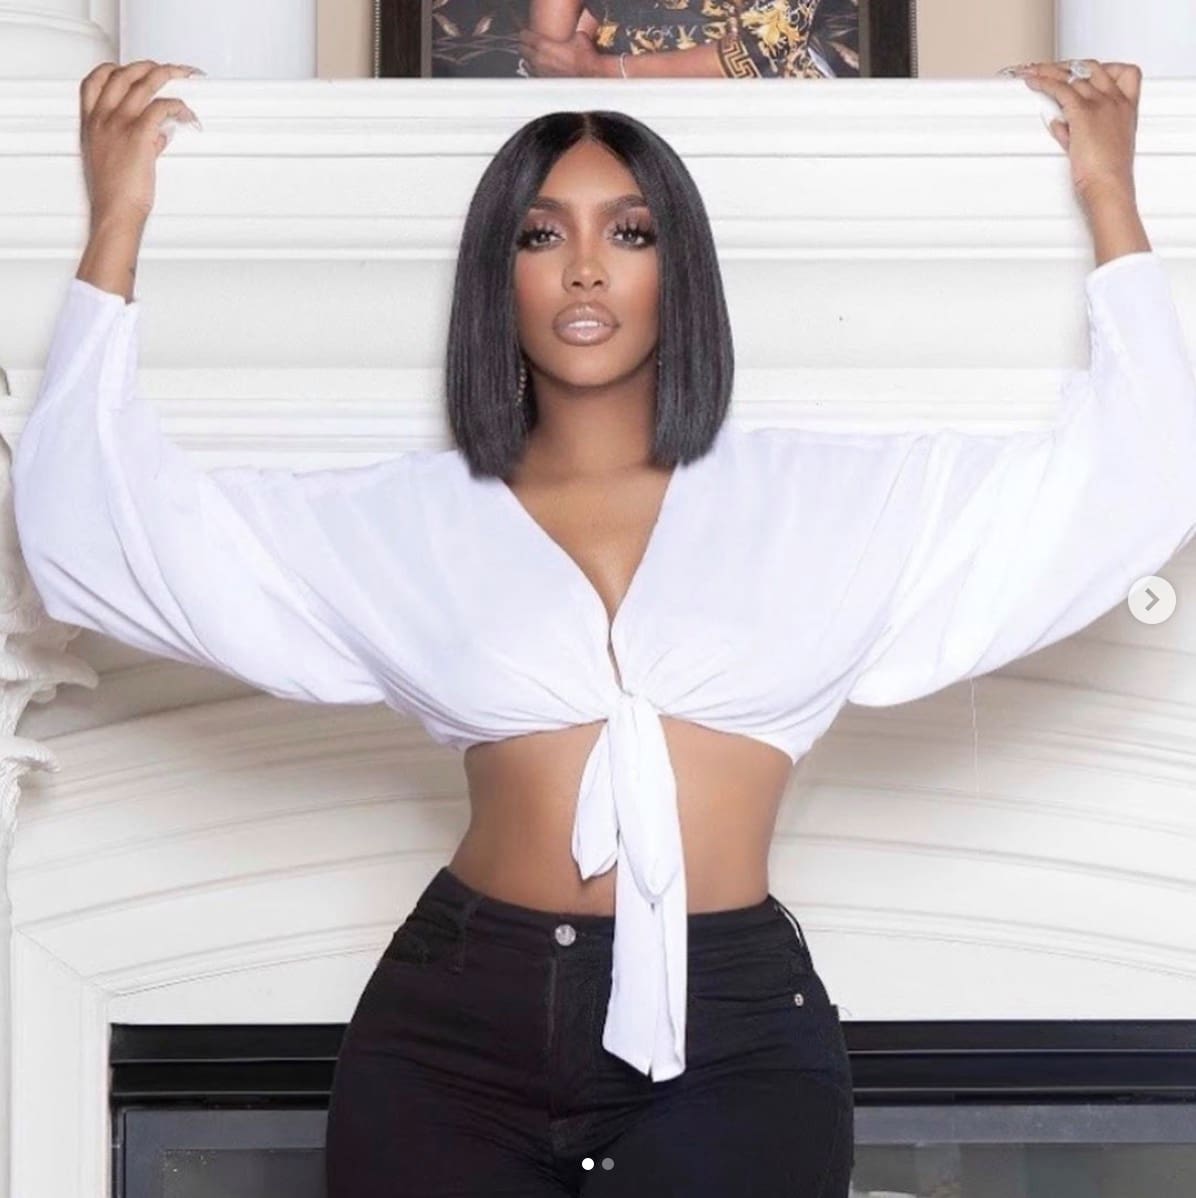 ”porsha-williams-latest-family-photos-have-fans-in-awe-her-mother-diane-is-a-doll”